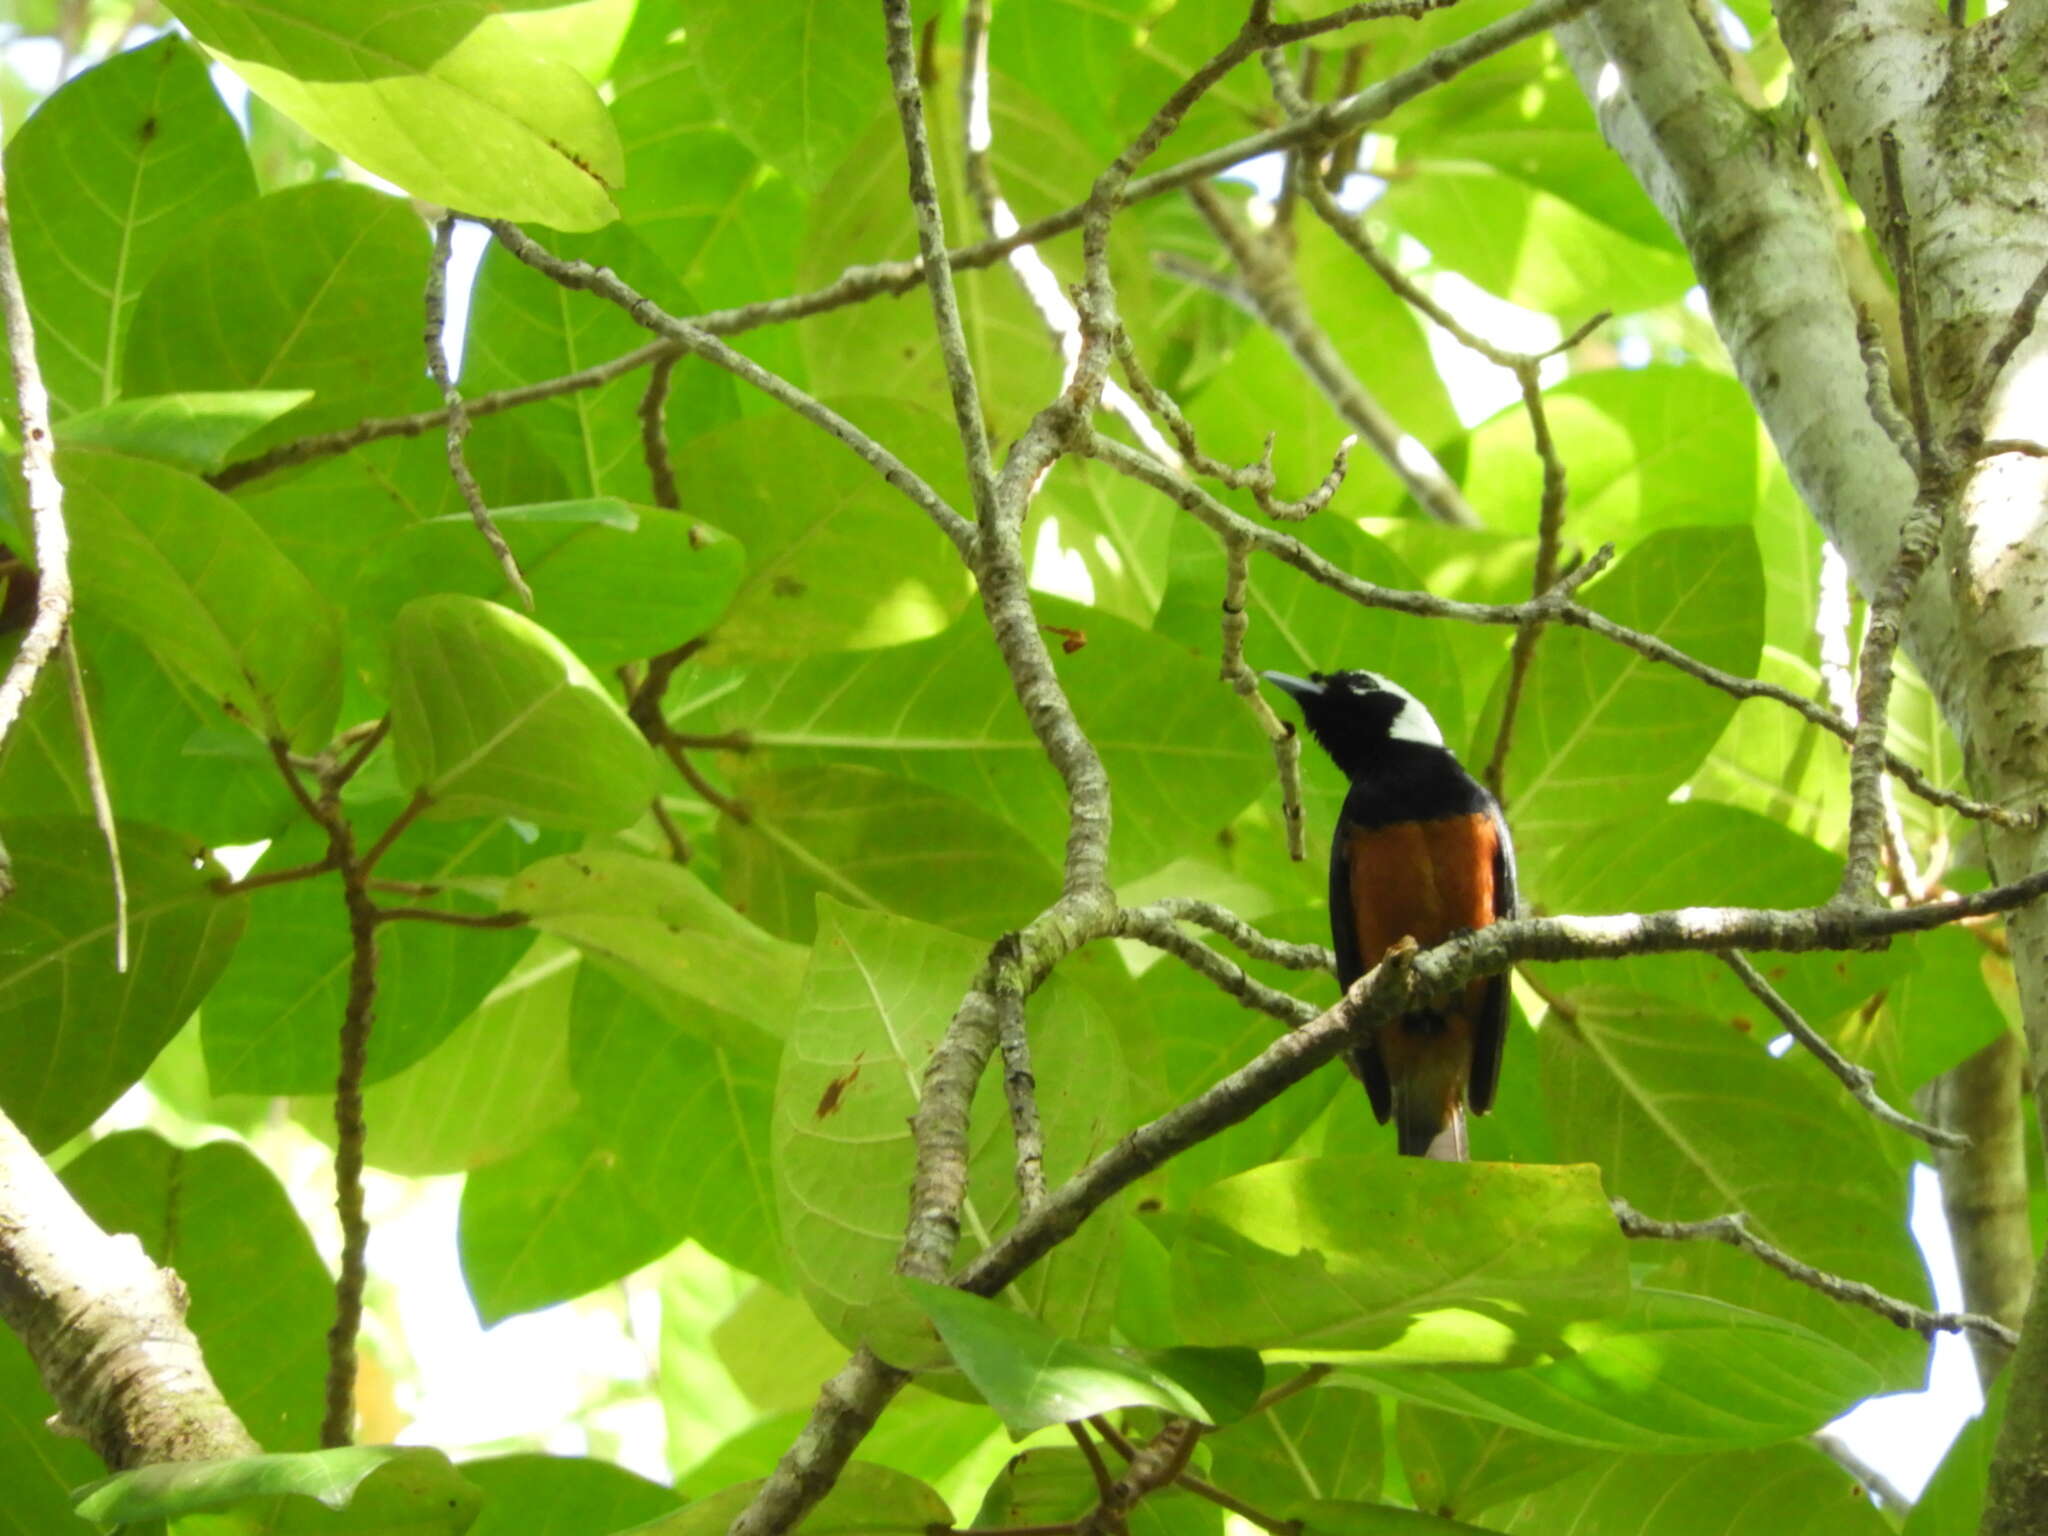 Image of White-capped Monarch